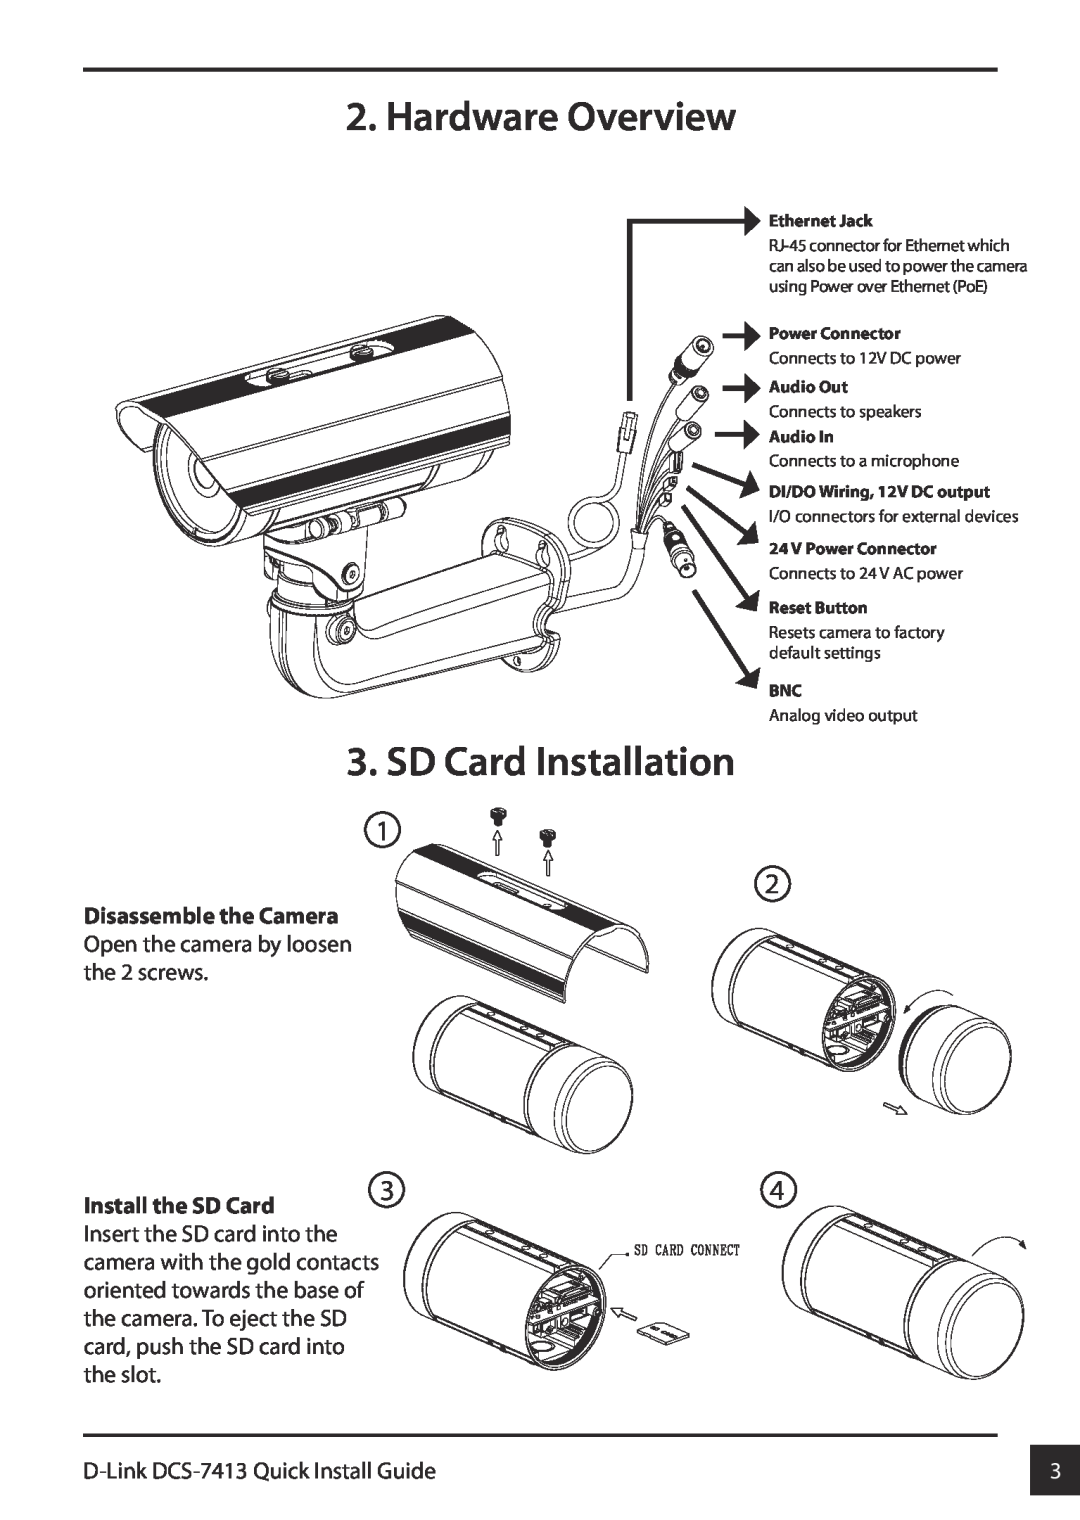 D-Link DCS-7413 Hardware Overview, SD Card Installation, Disassemble the Camera Open the camera by loosen the 2 screws 